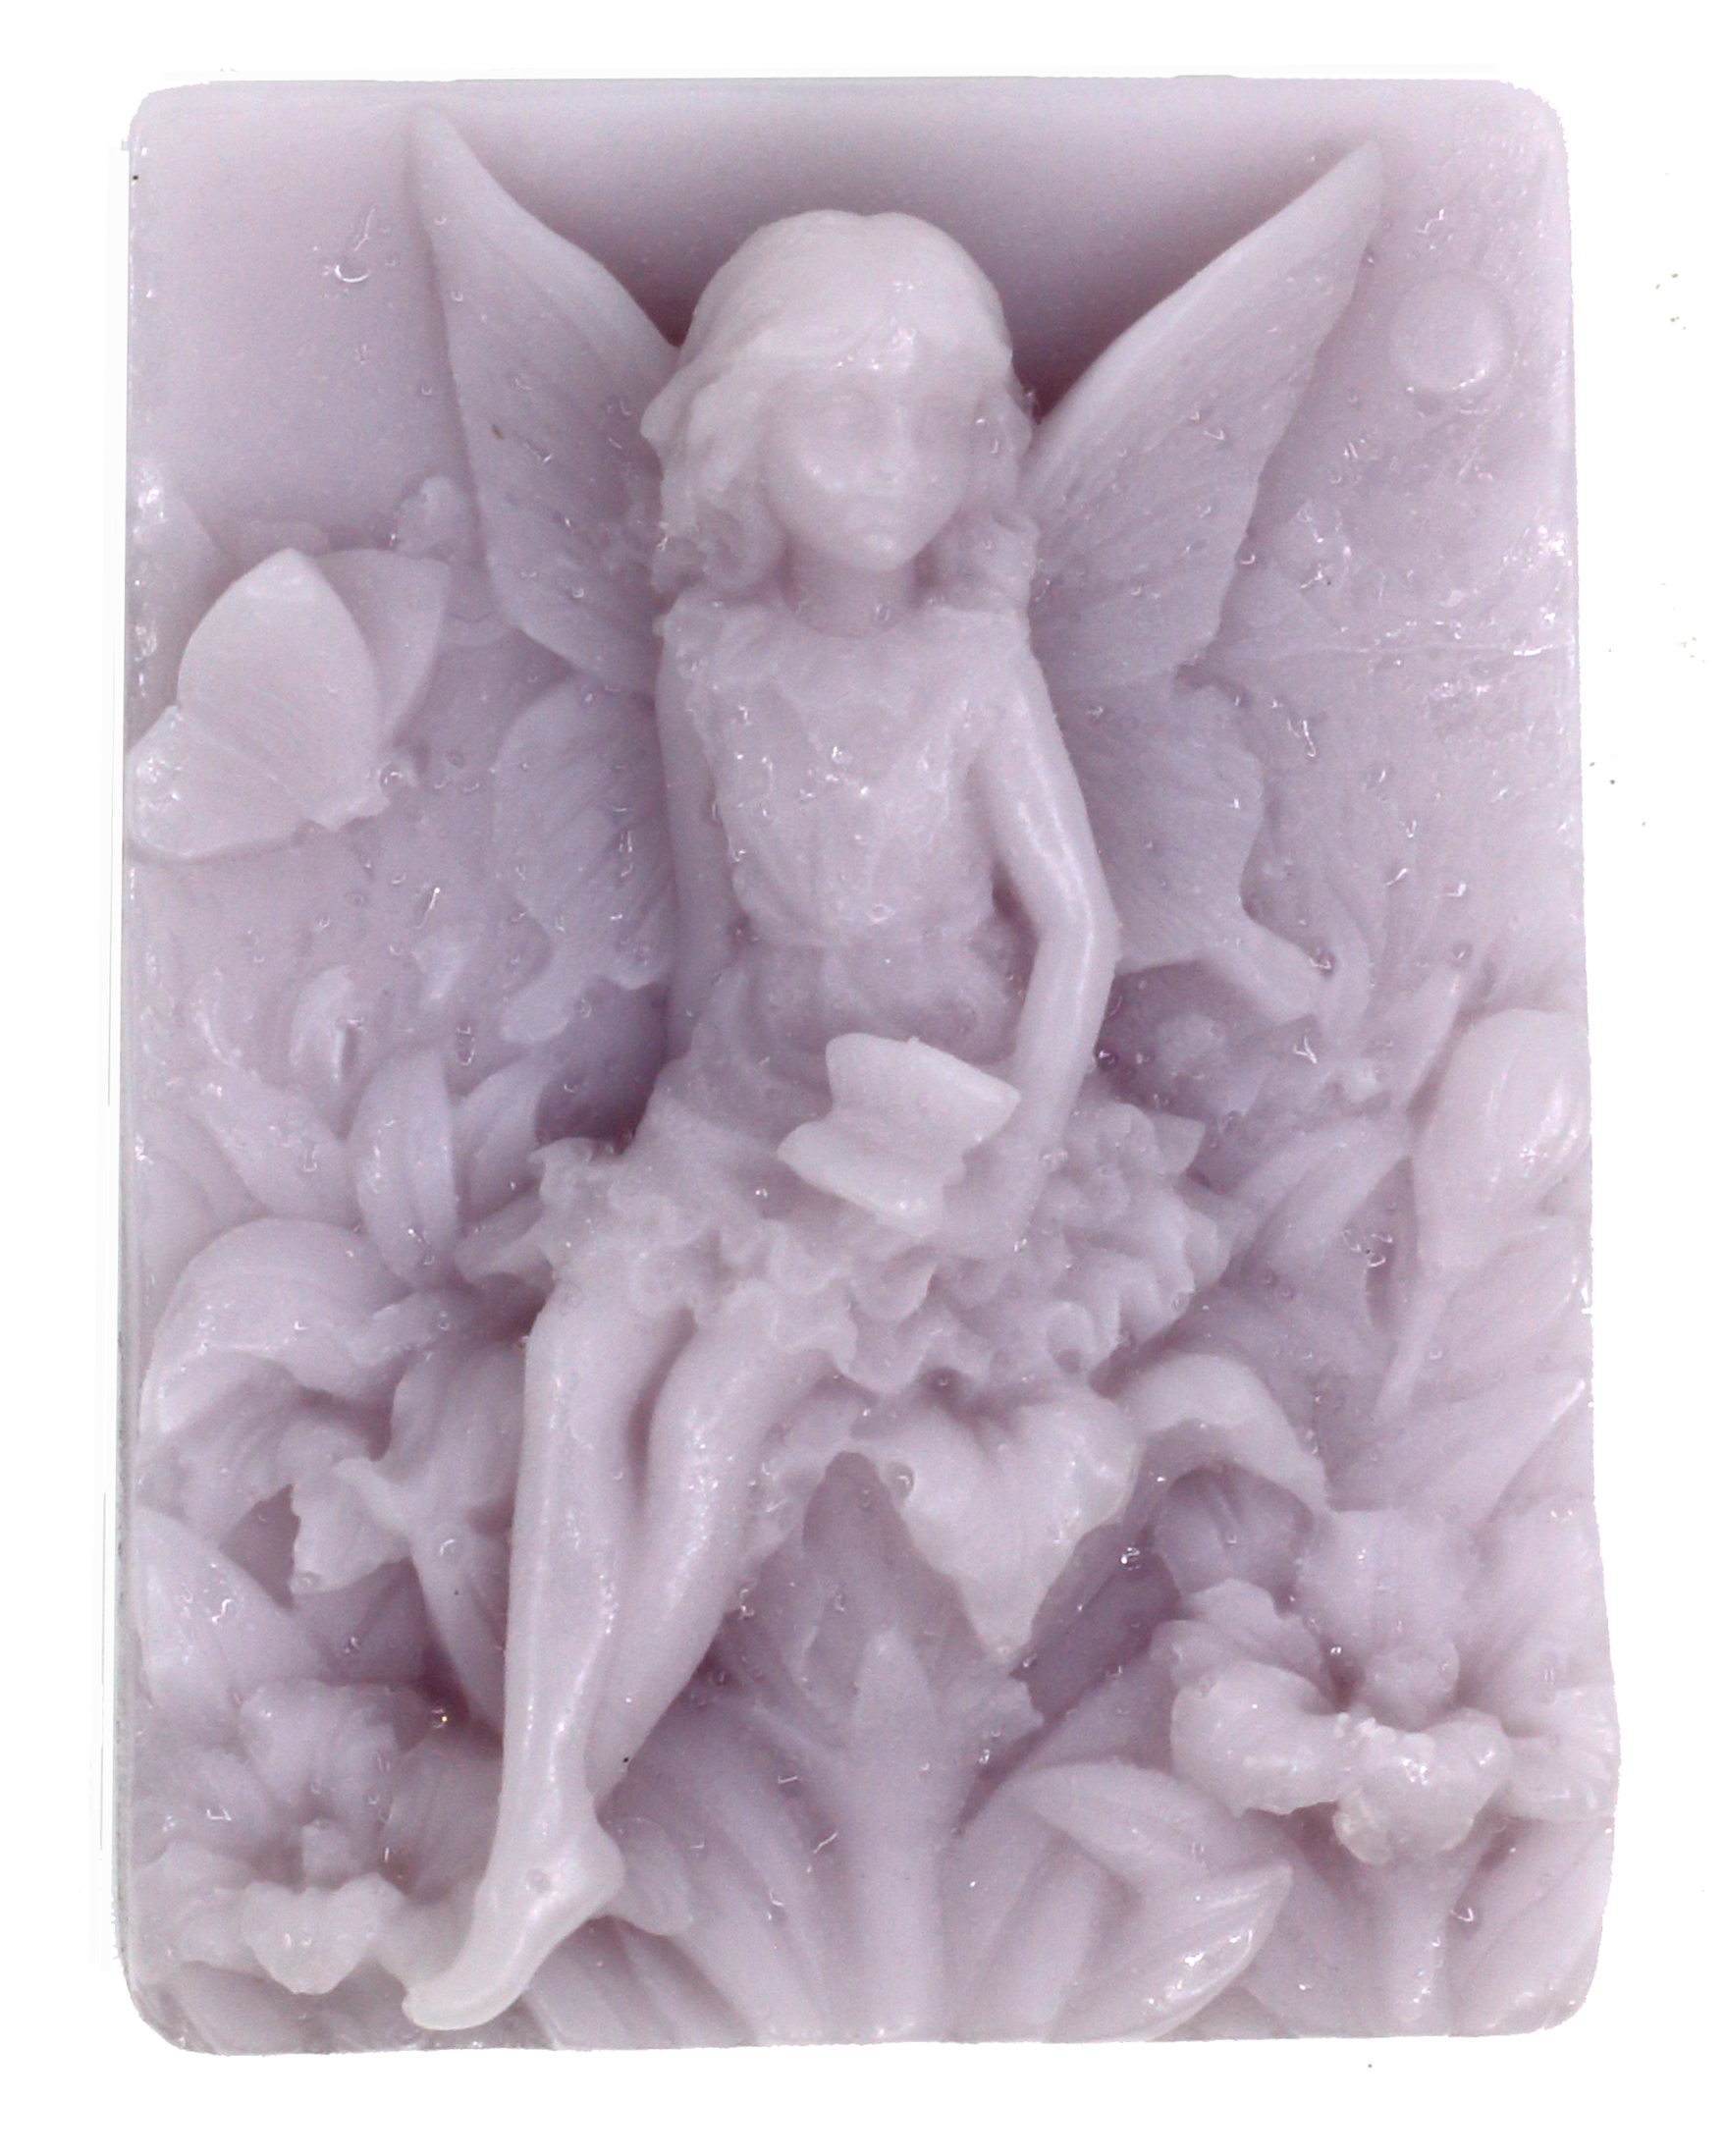 NLW-14 - 100g MP Fairy Lady Soap (Pastel Color)